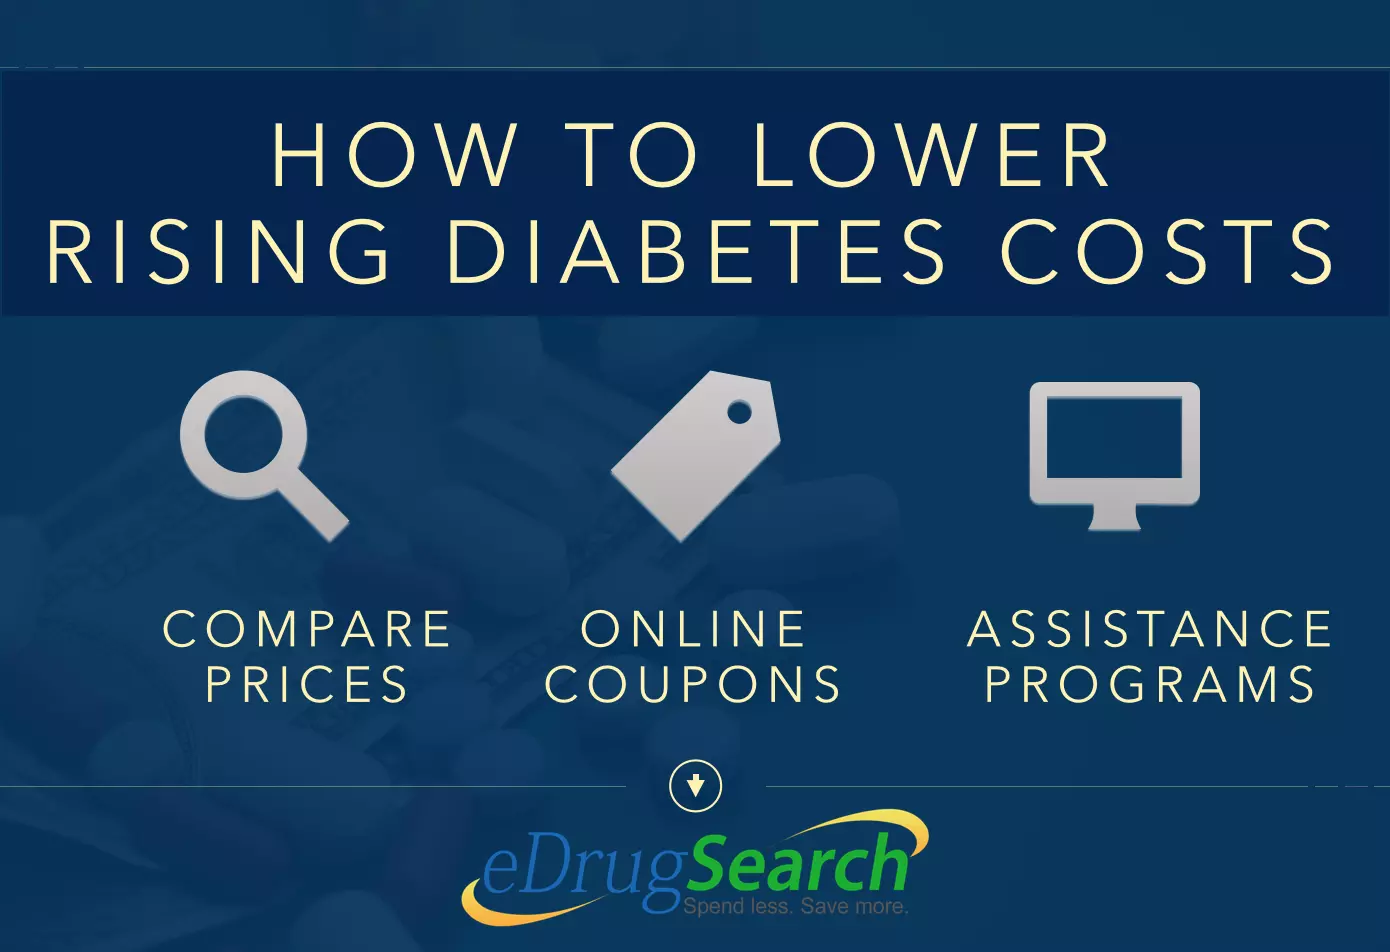 How to Lower Rising Diabetes Costs